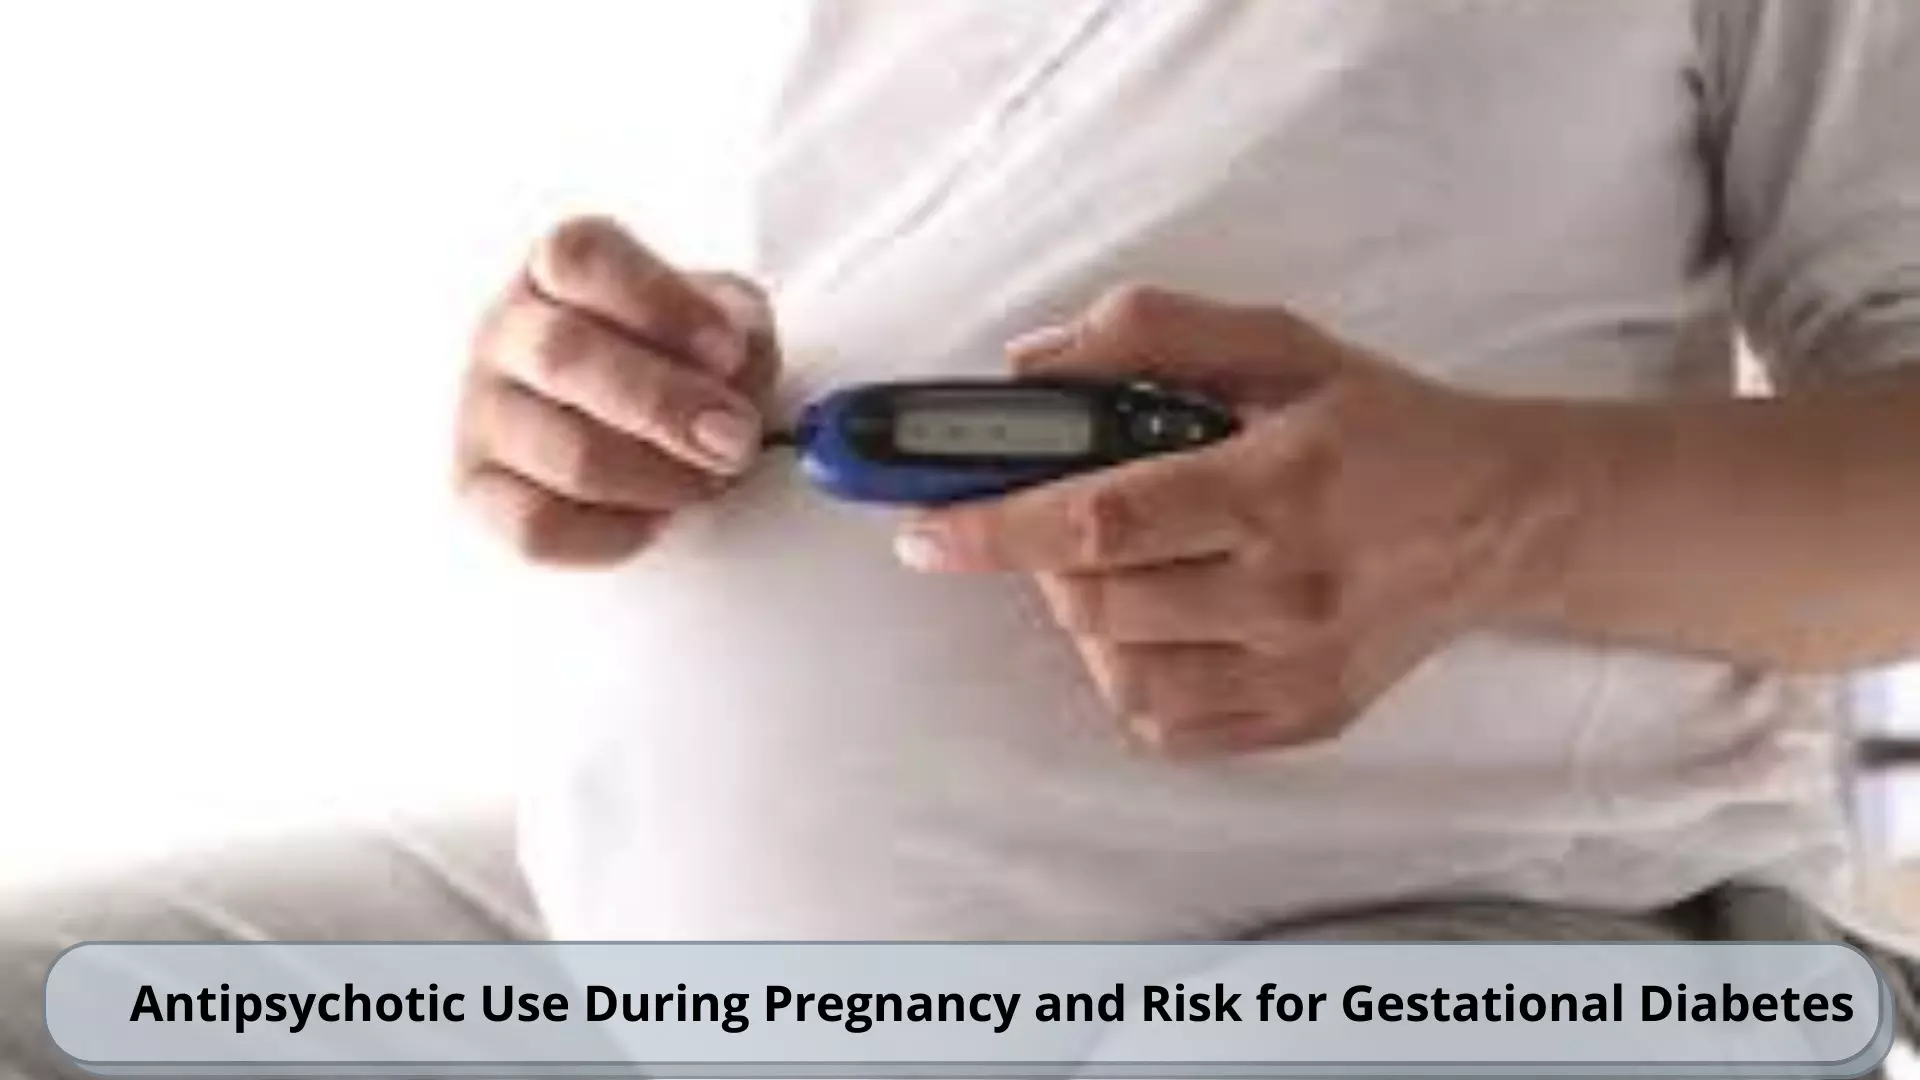 Antipsychotic Use During Pregnancy and Risk for Gestational Diabetes